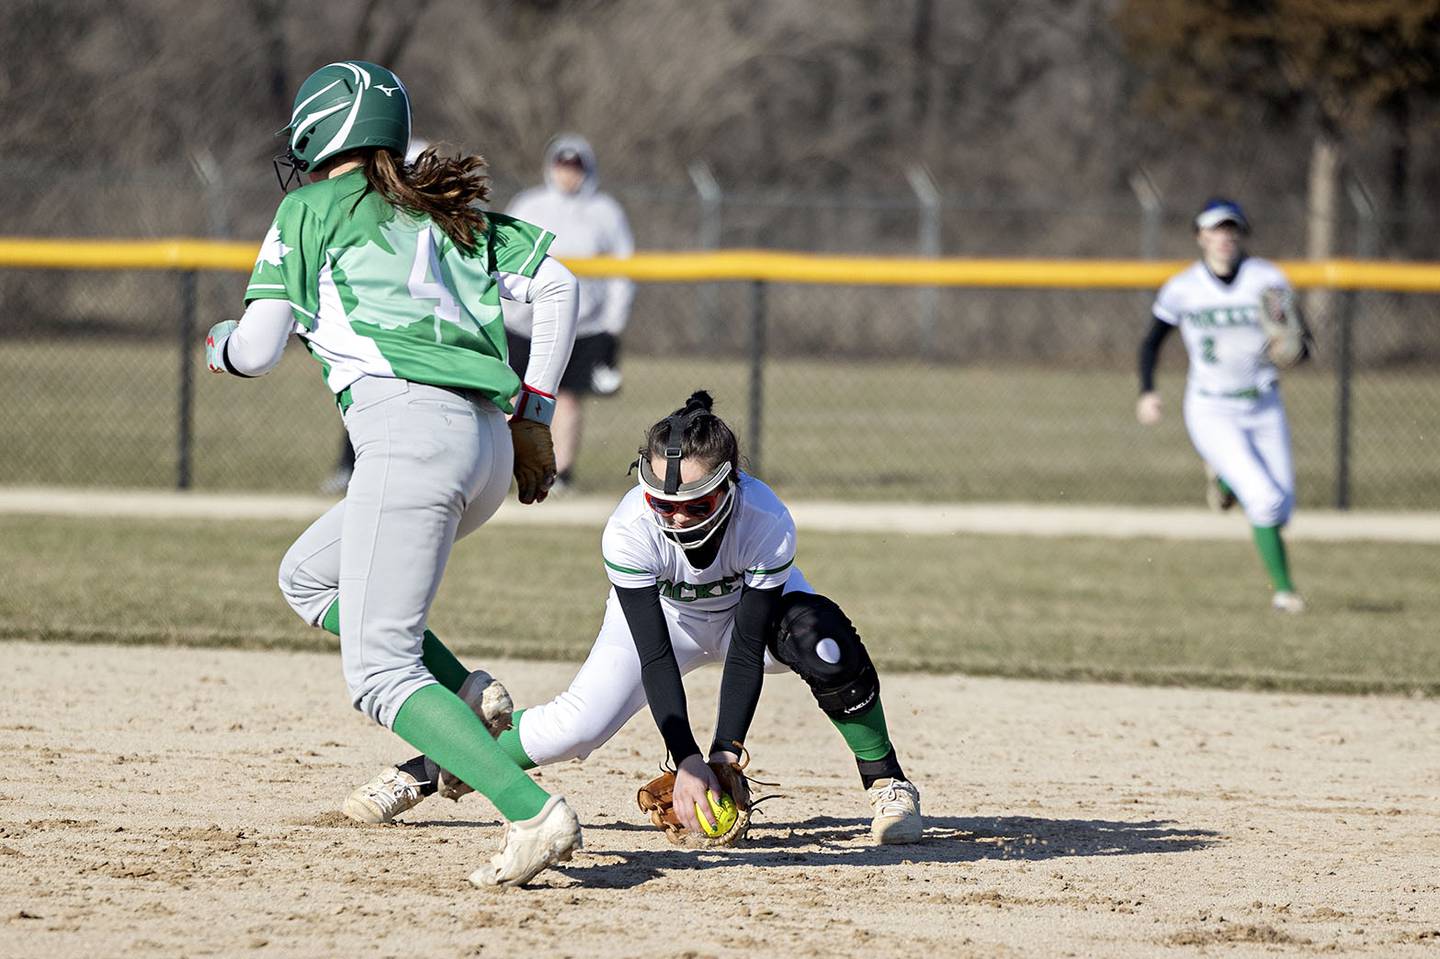 Rock Falls’ Maddison Morgan scoops up a grounder at second base for an out against Geneseo Wednesday March 29, 2023.